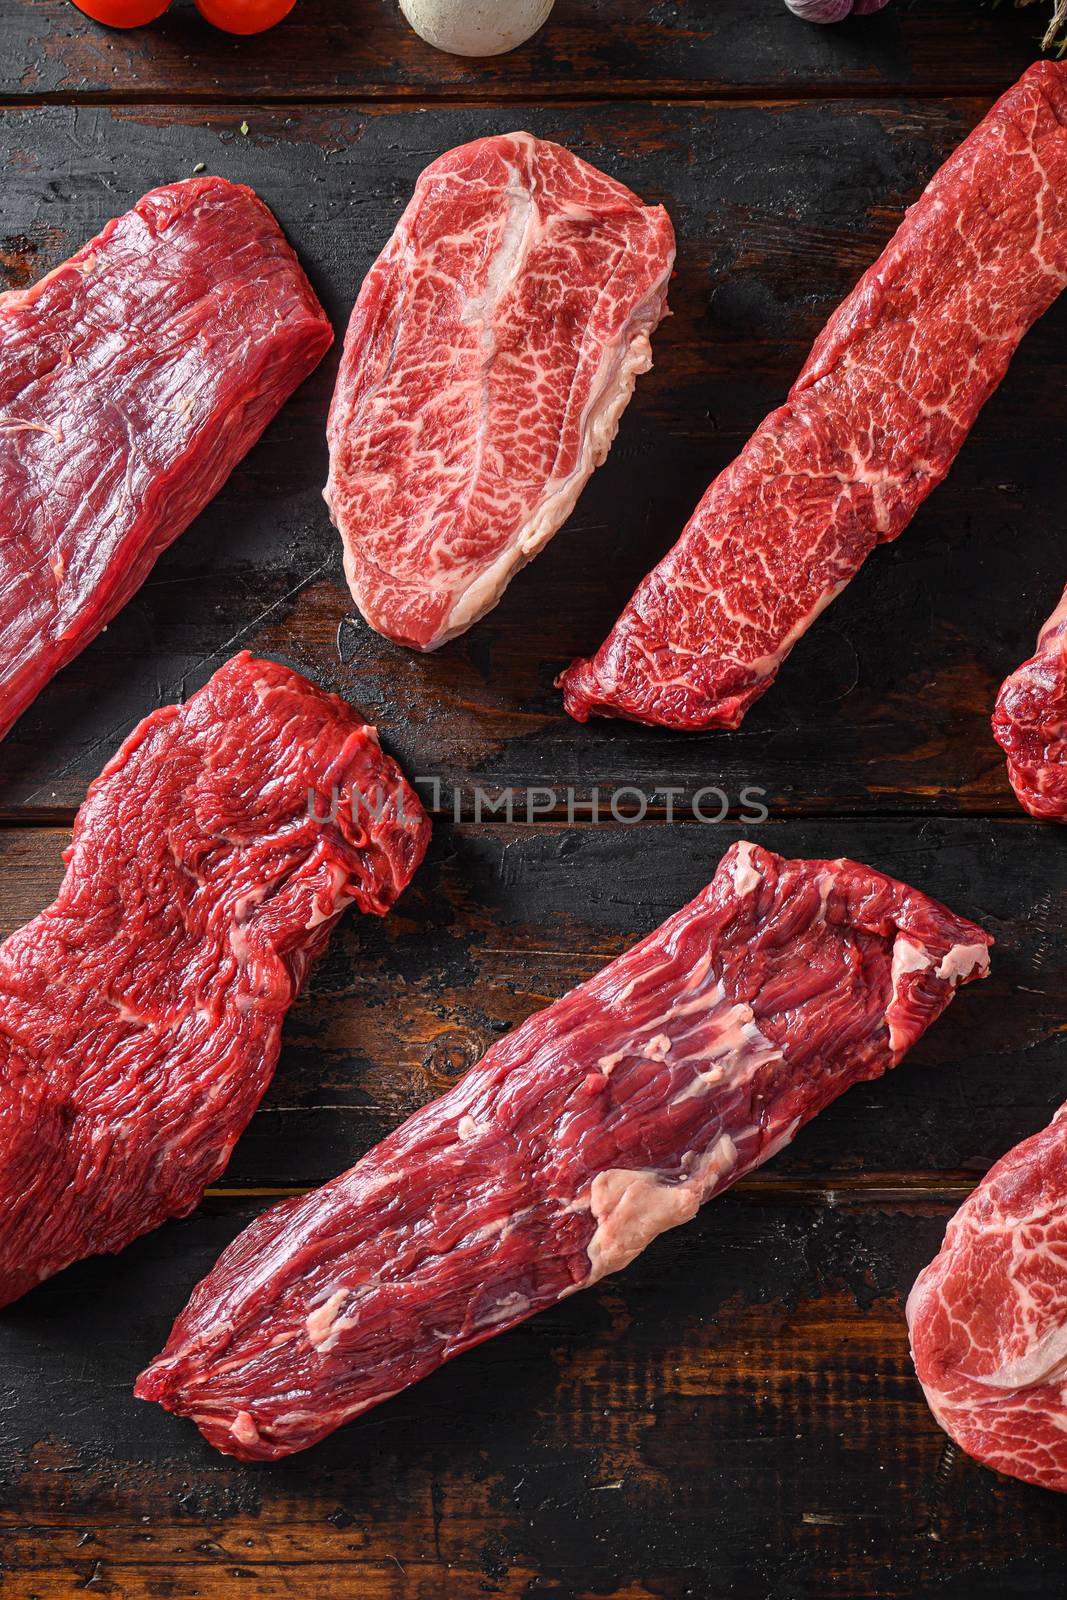 Alternative beef cut machete skirt steak close up in front of other cuts in butchery on old wood table top view vertical.